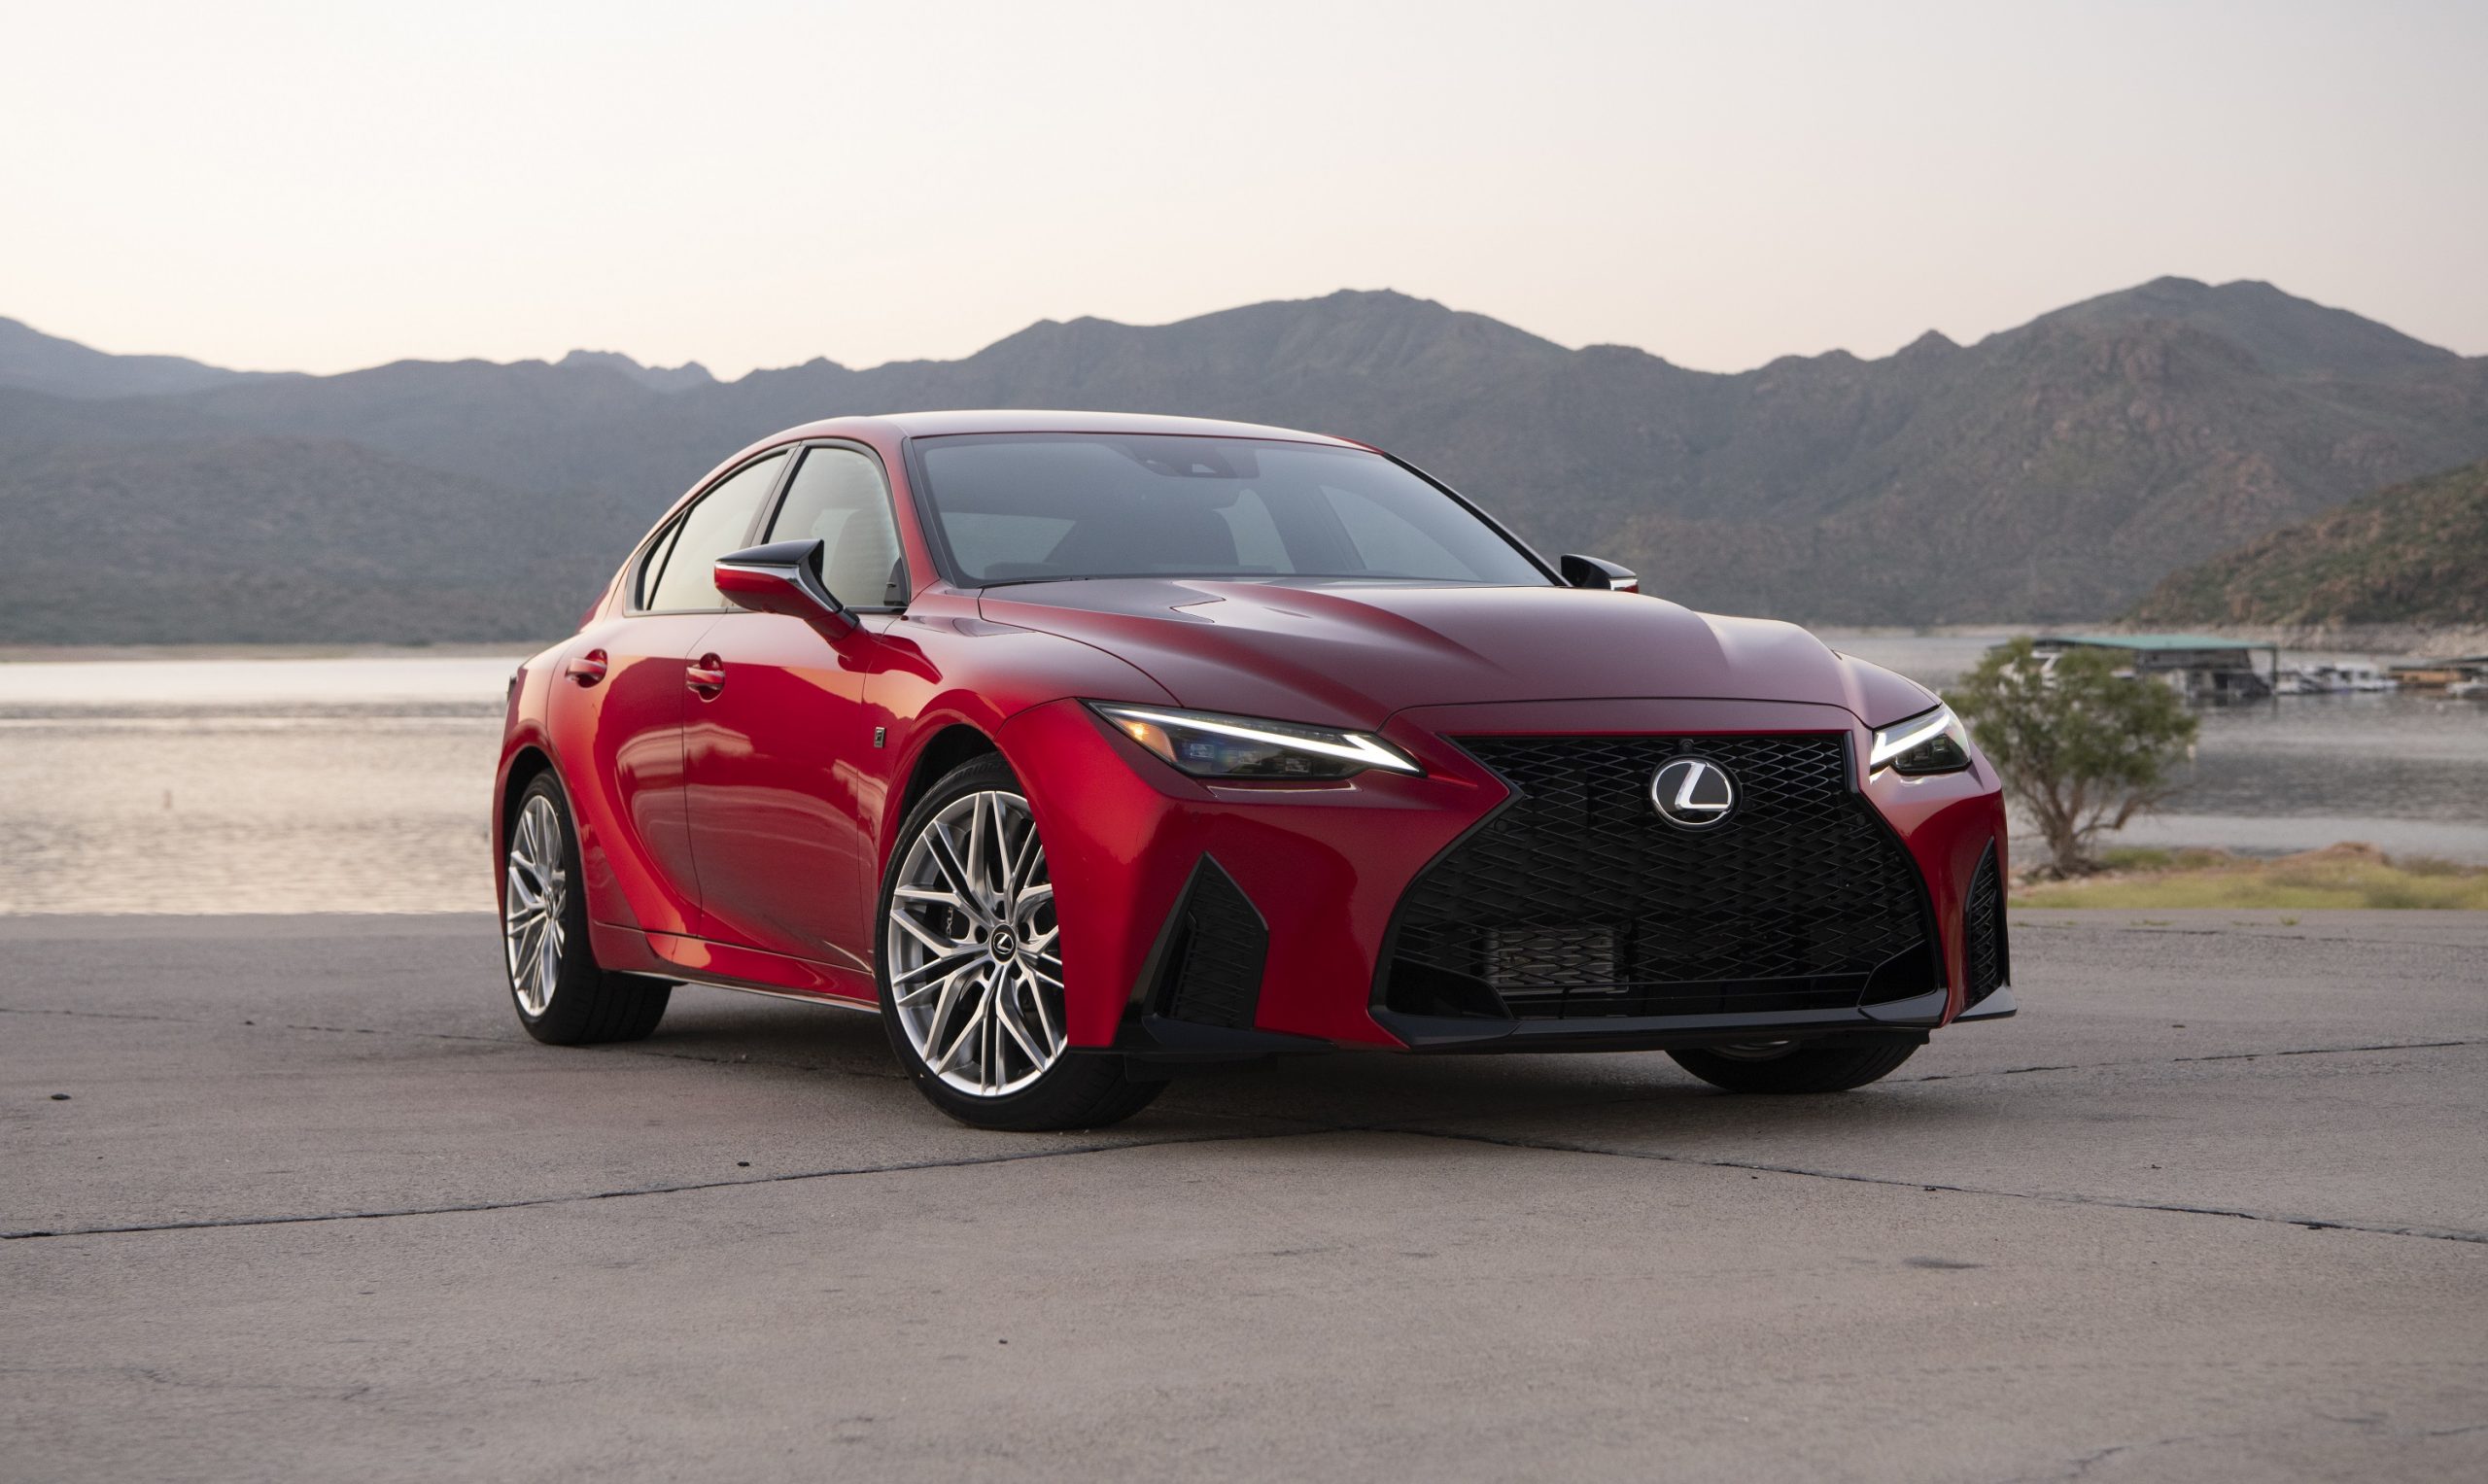 The 2022 Lexus IS 500 luxury car in red, shot from the front 3/4 angle